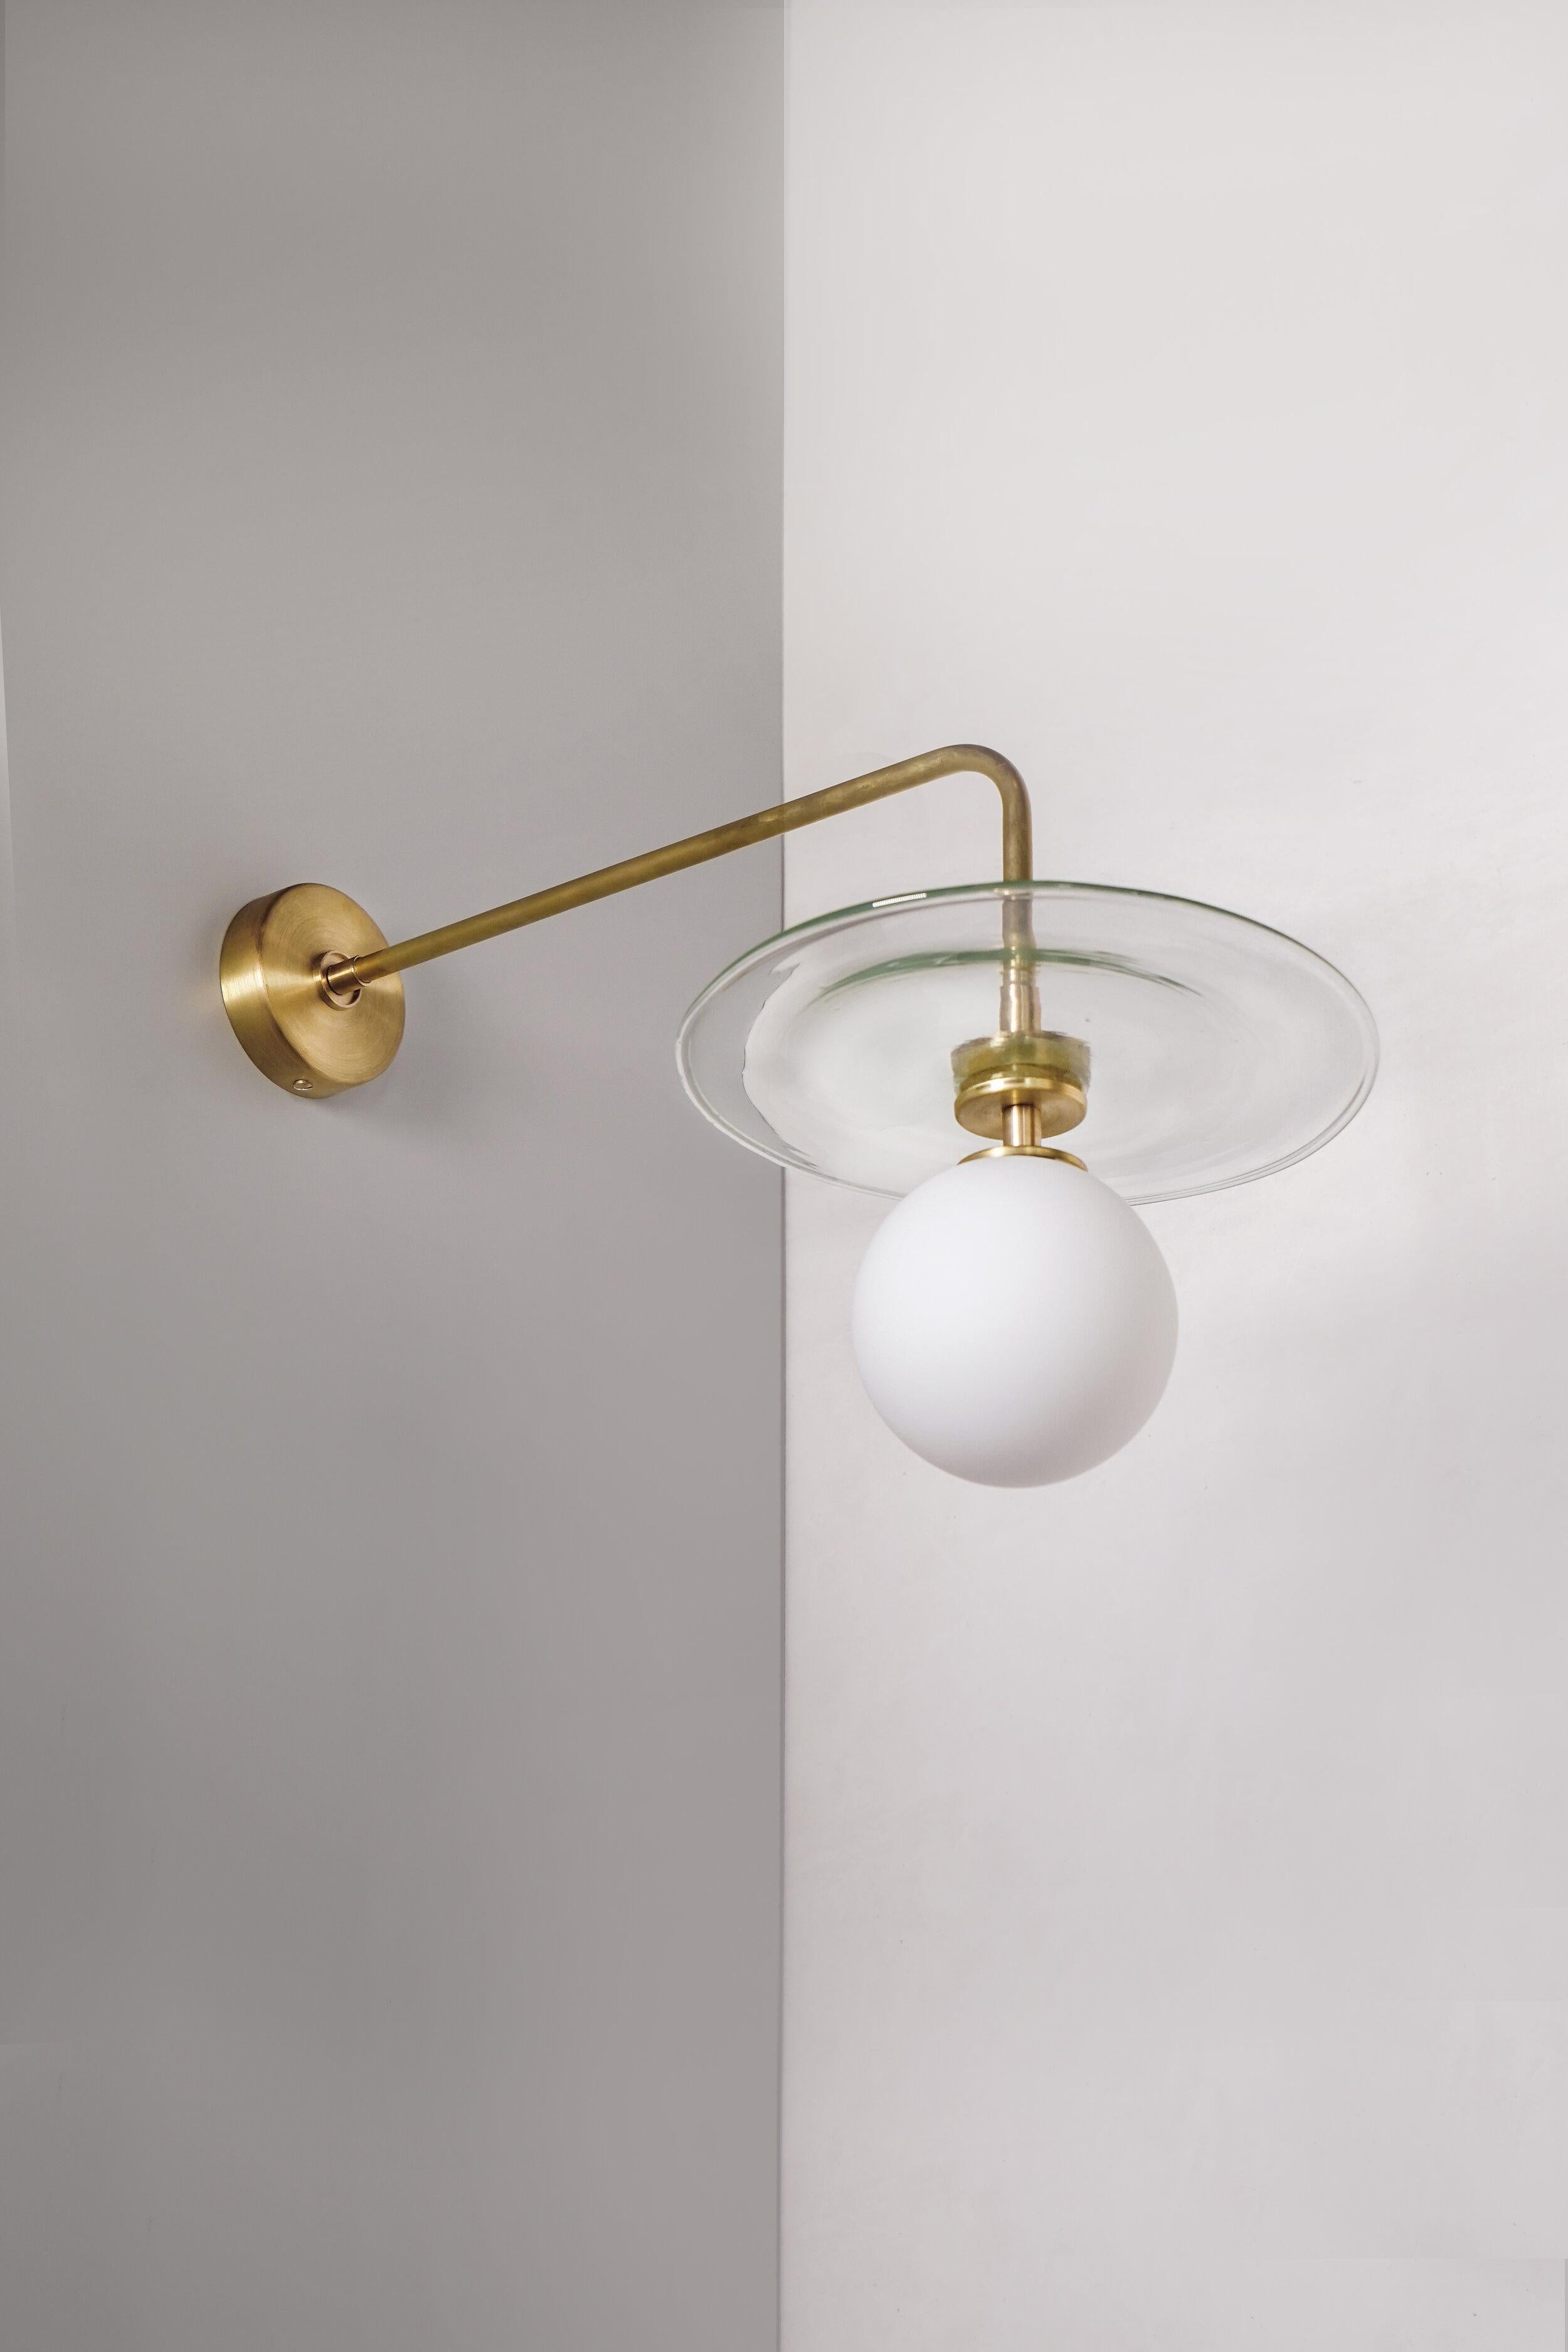 Plat Mini wall light by Contain
Dimensions: D22.5 x W26 x H48 cm 
Materials:Brass structure, opal glass and blown glass from local production.
Available in different finishes.

All our lamps can be wired according to each country. If sold to